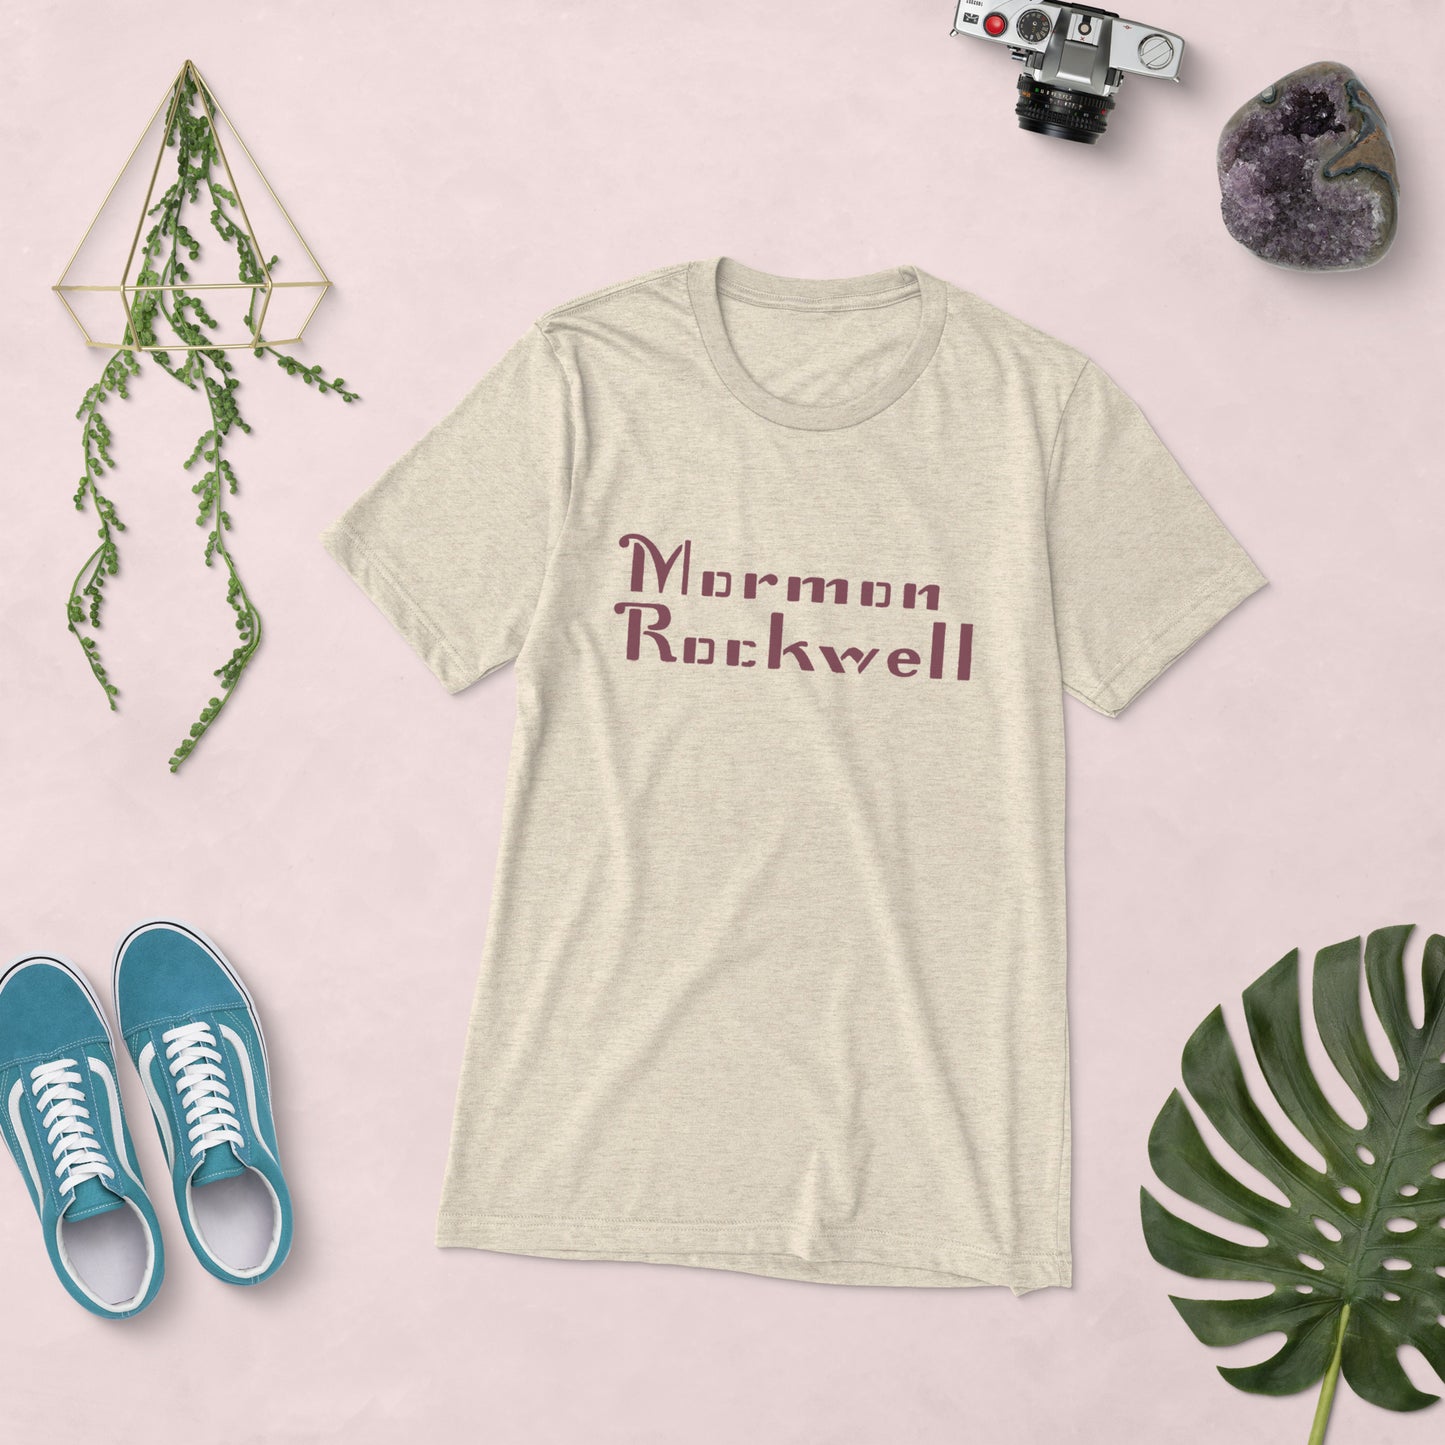 Mormon Rockwell Original, Double-Sided Triblend T-shirt